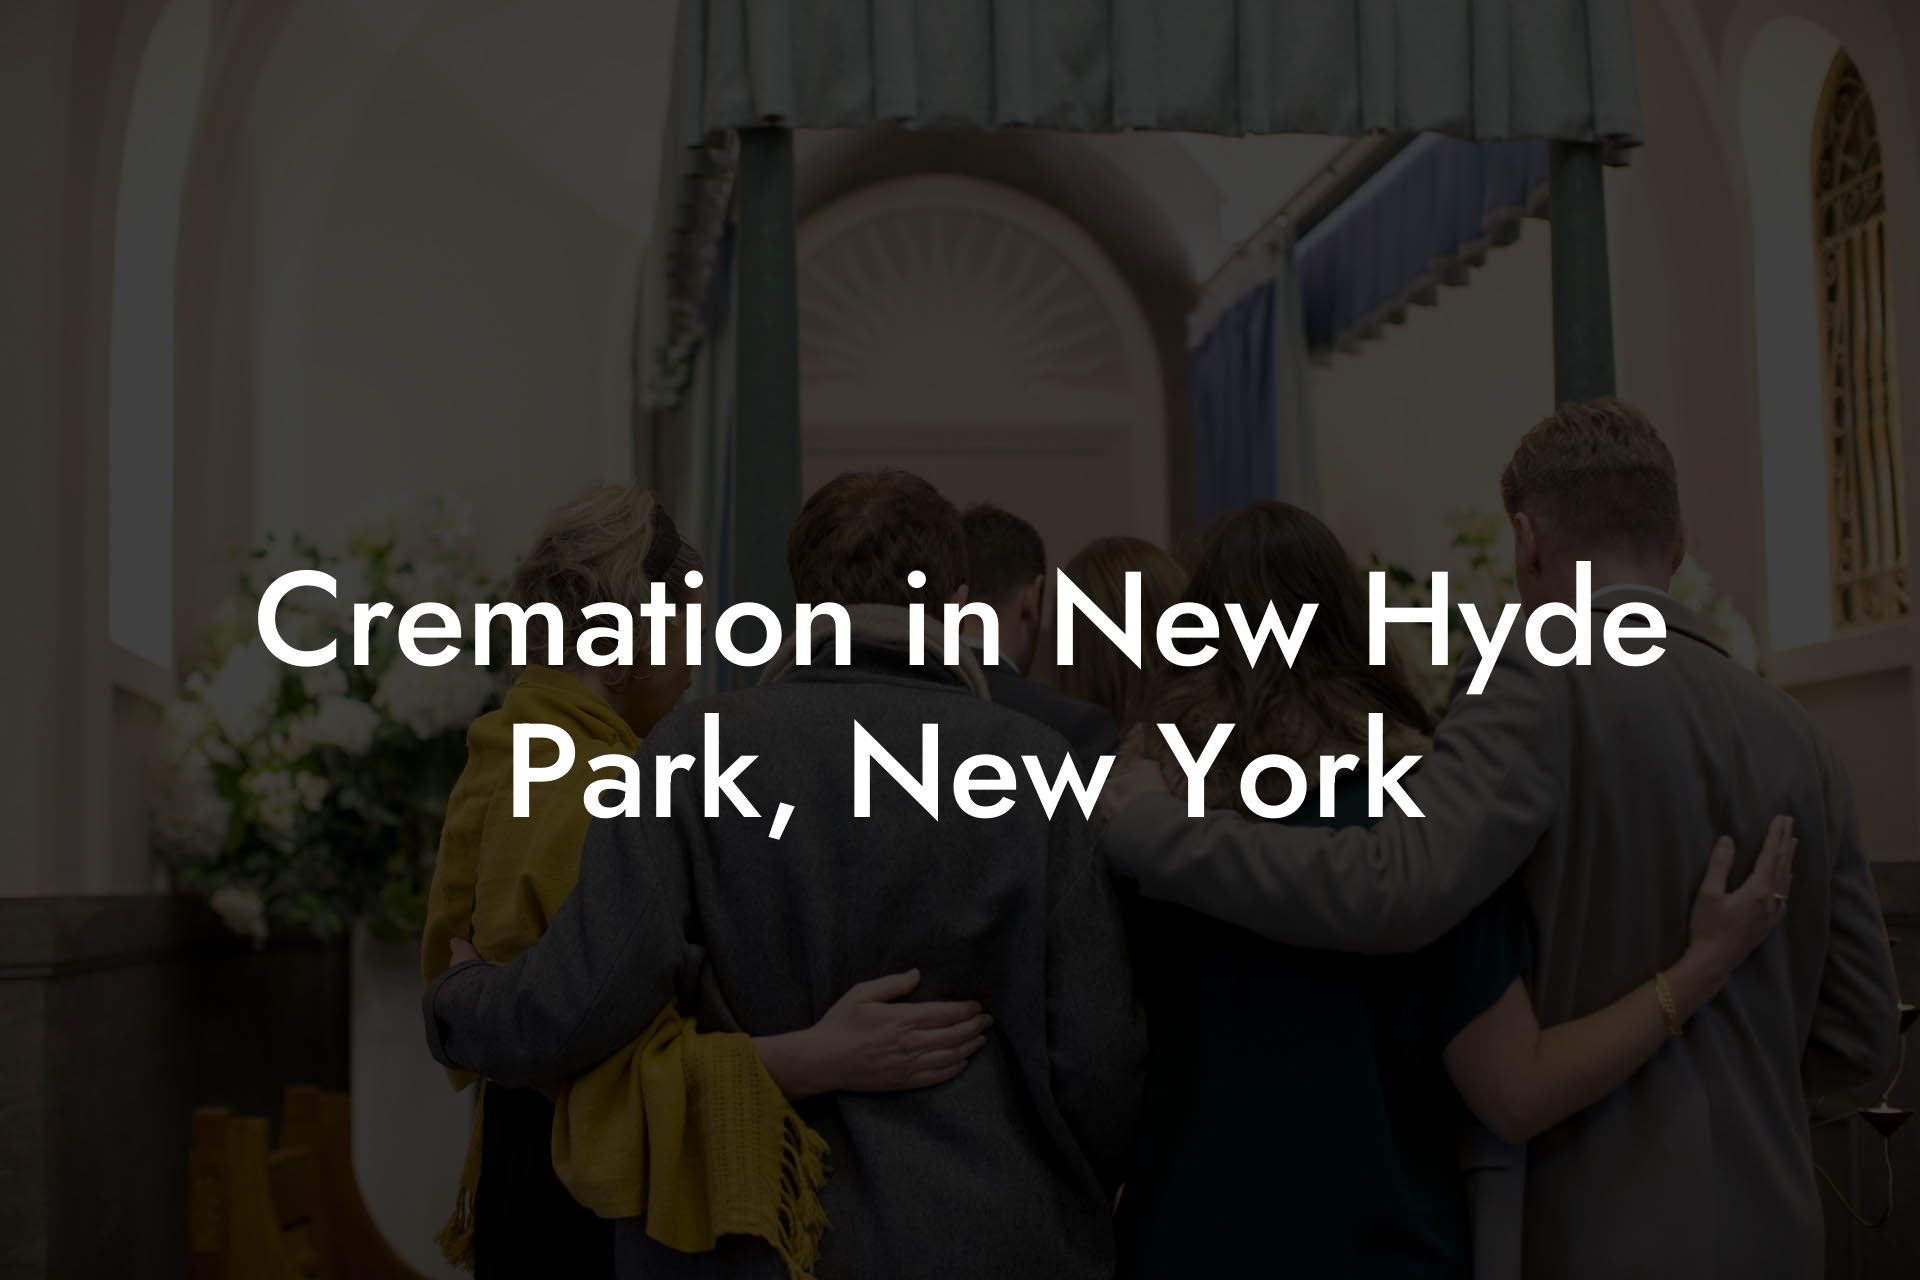 Cremation in New Hyde Park, New York